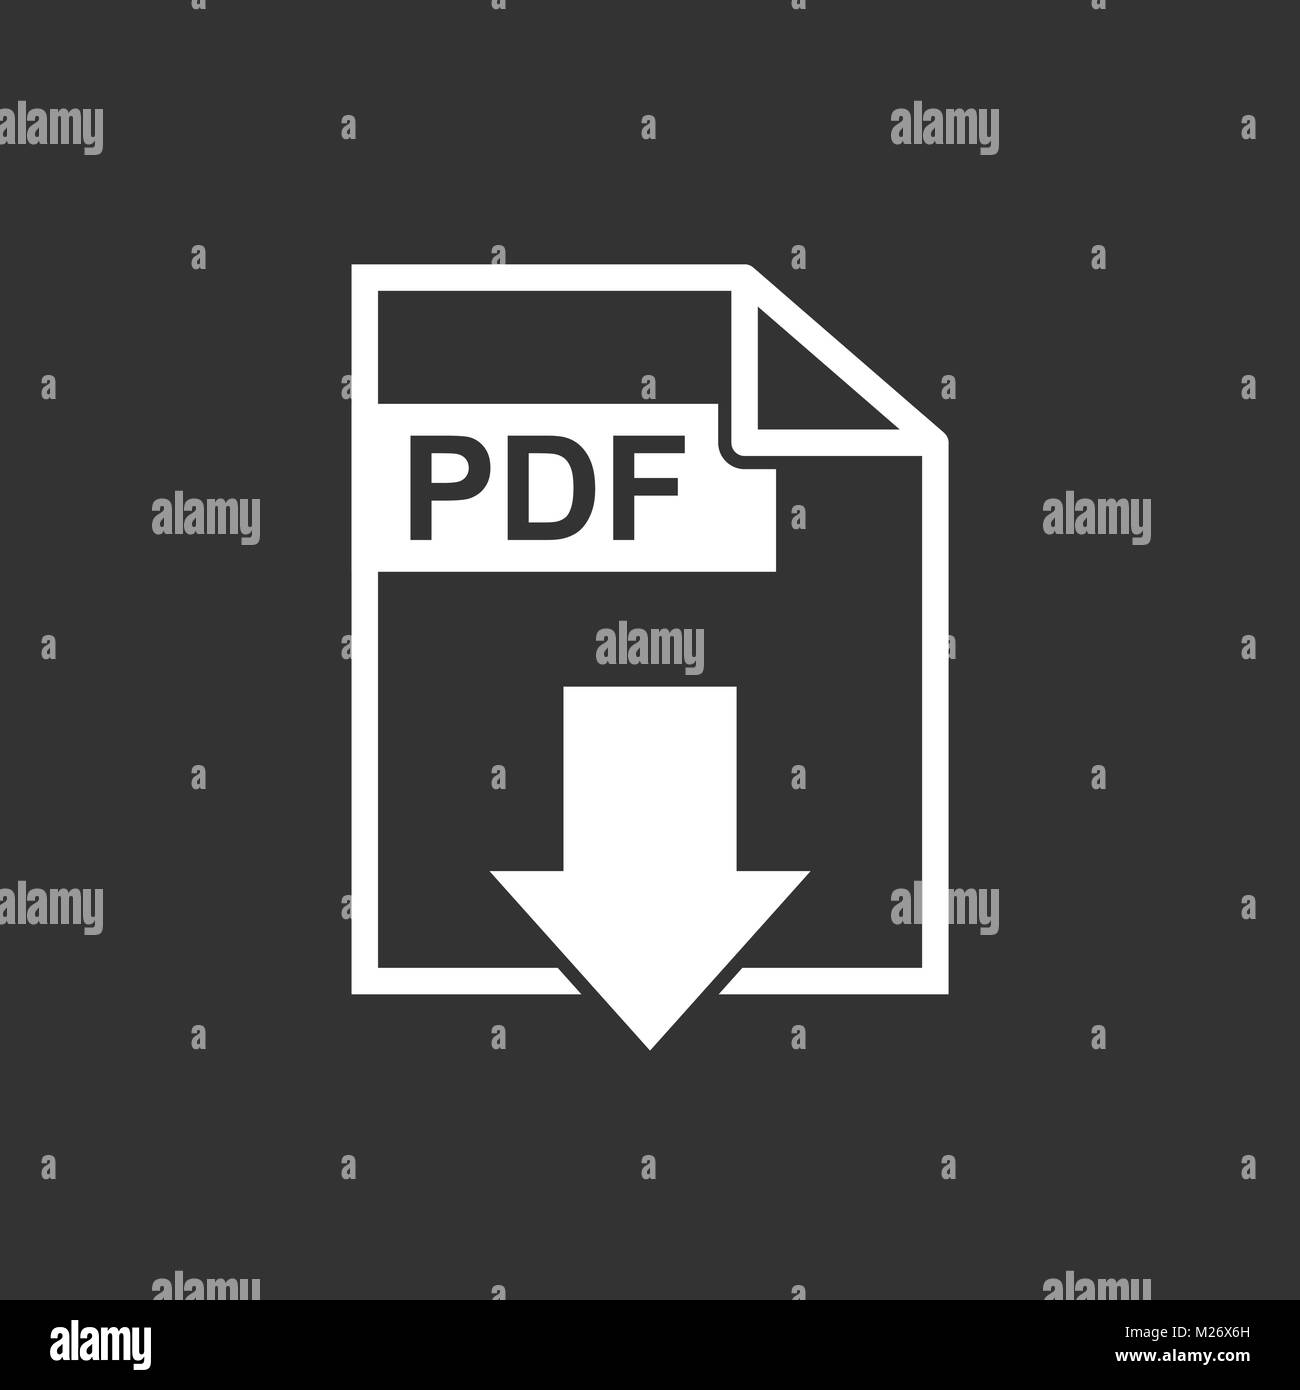 PDF download vector icon. Simple flat pictogram for business, marketing, internet concept. Vector illustration on black background. Stock Vector